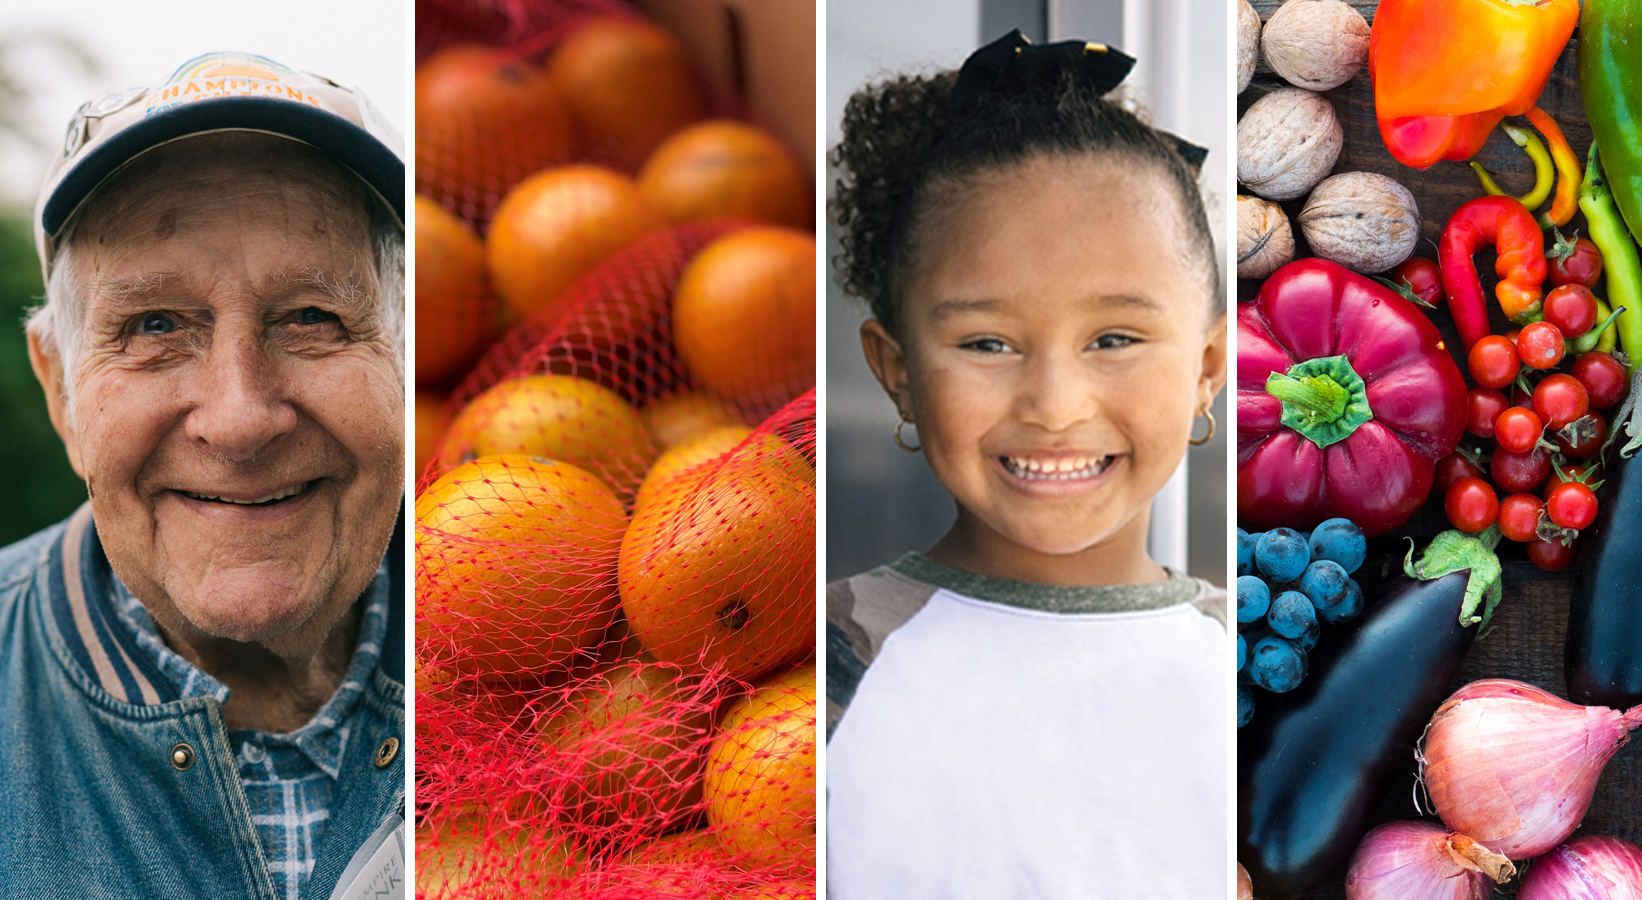 Photos of a senior man, oranges, a young girl, and assorted vegetables